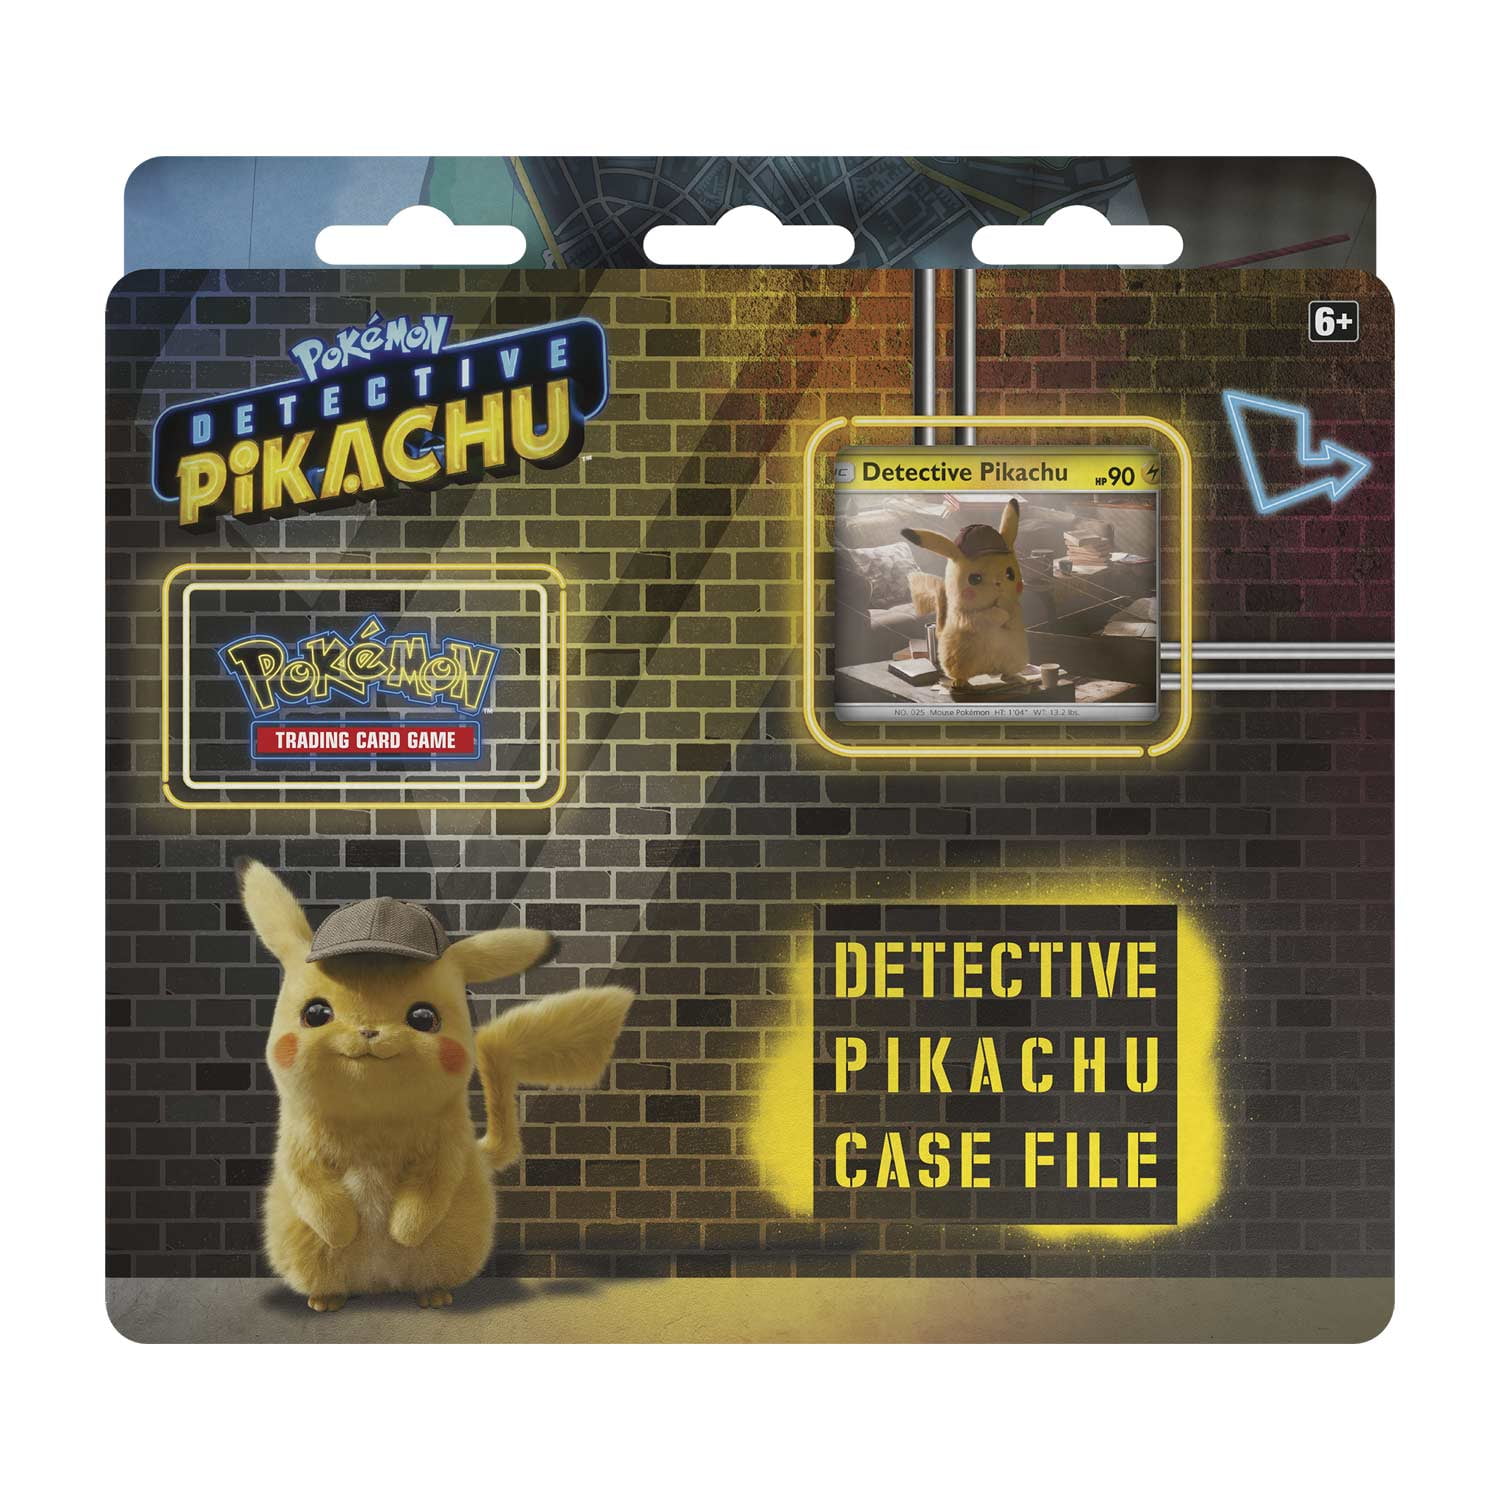 Detective Pikachu Case File 3 Booster Pack Promo Card & Coin New/Sealed Pokemon 